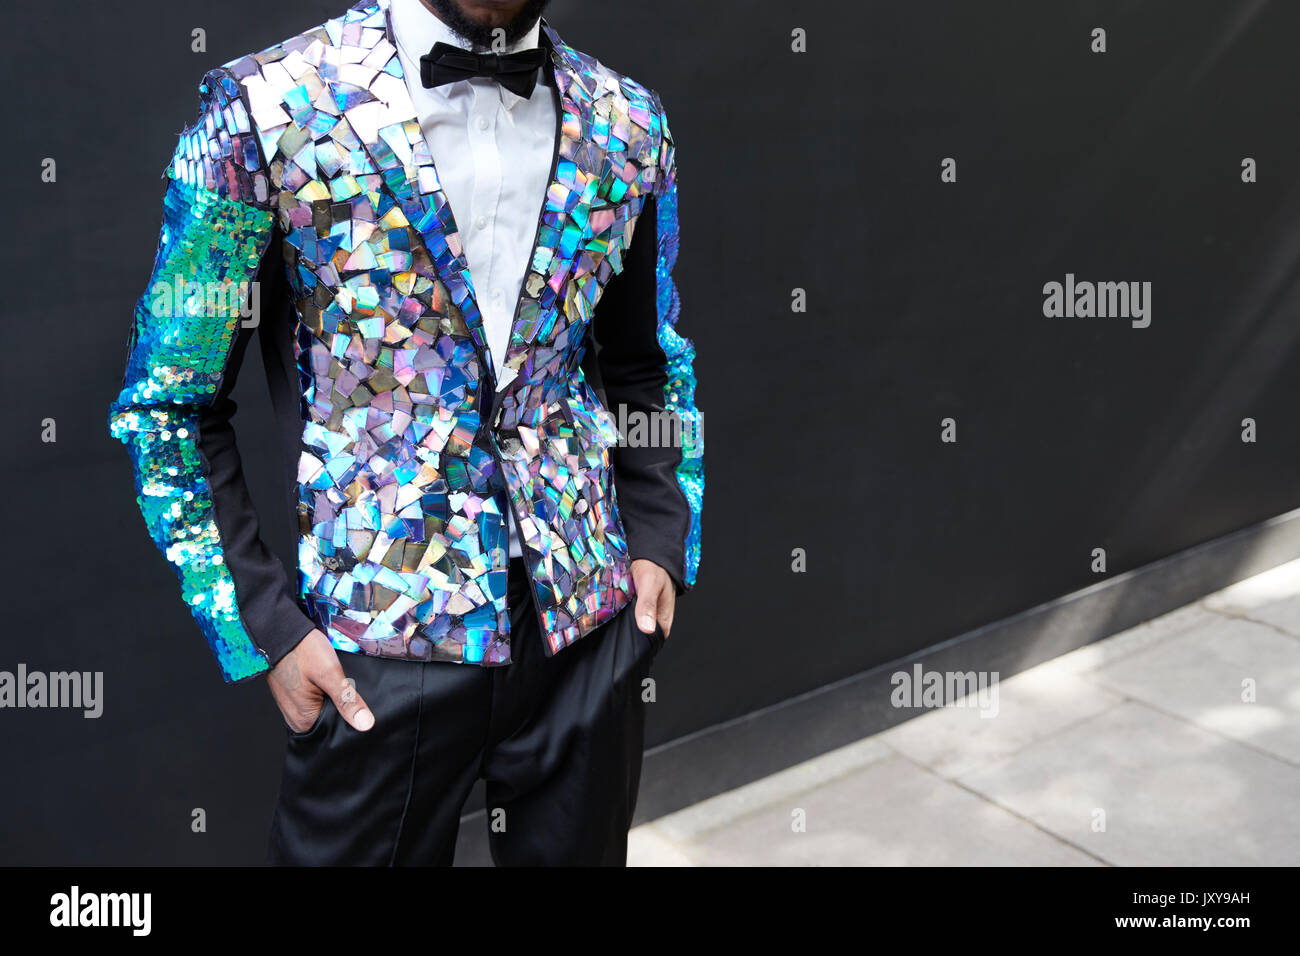 Mid section of man in sequinned prismatic jacket and bow tie Stock Photo